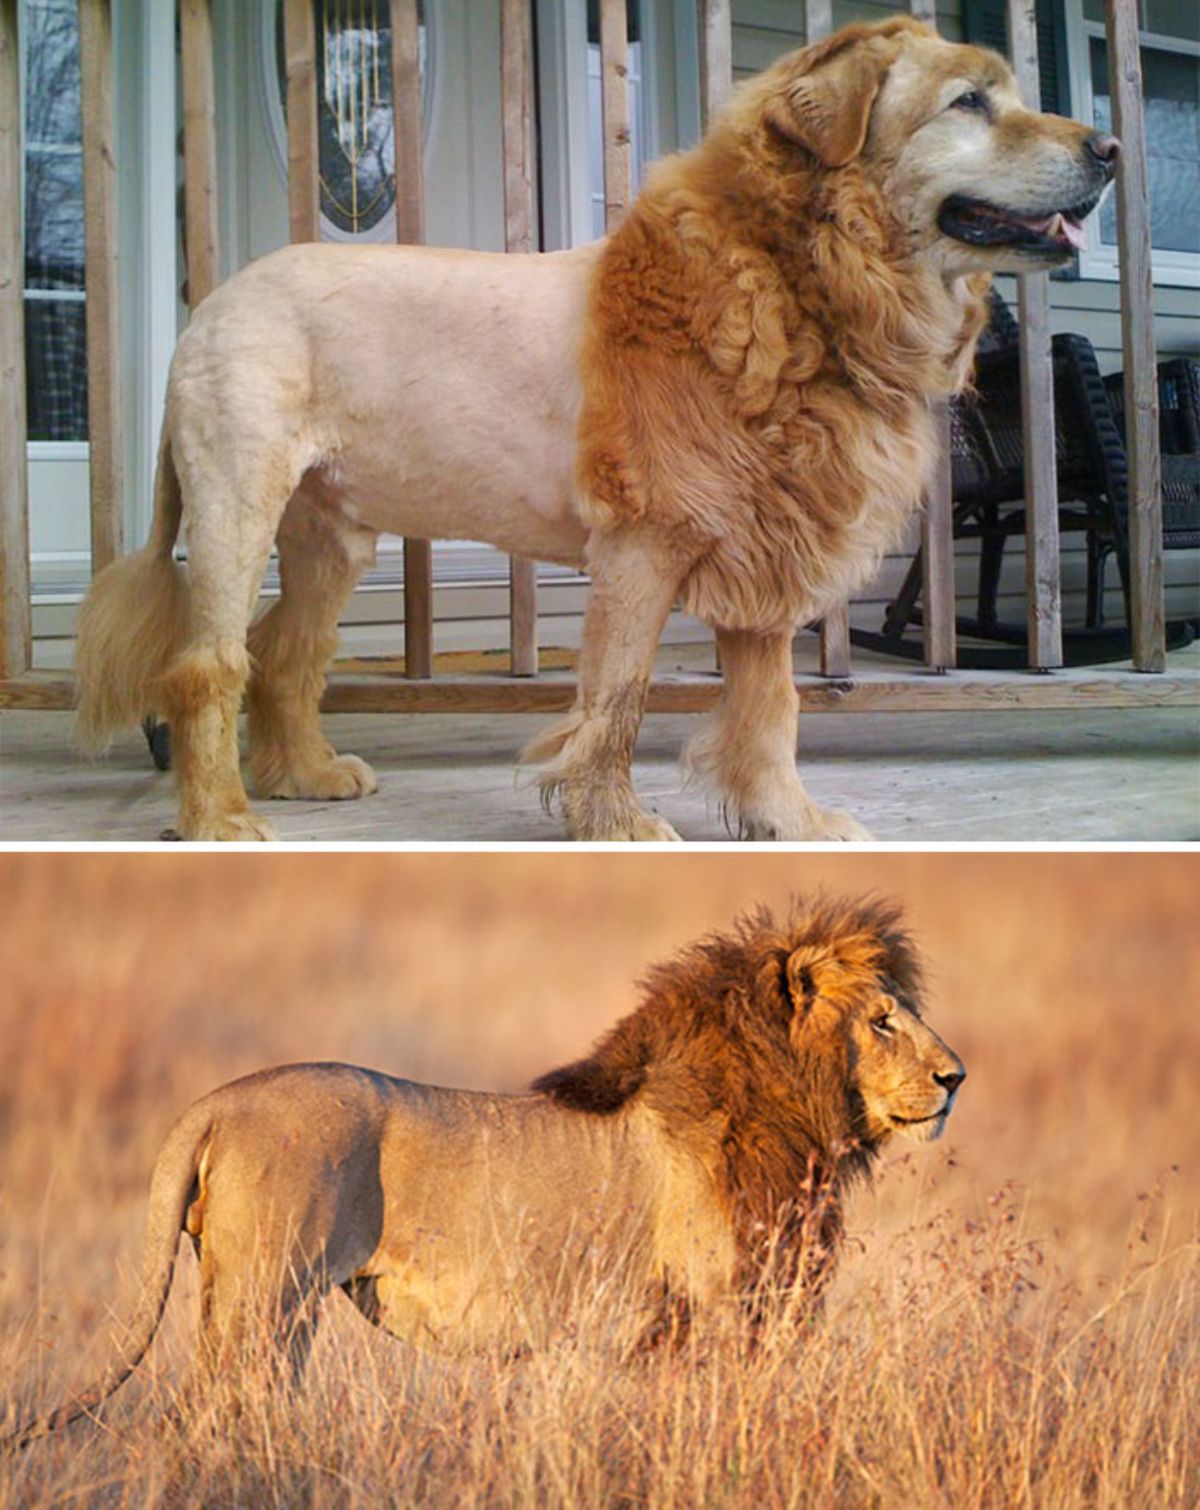 1 photo of a brown dog with a lion haircut and 1 photo of a lion